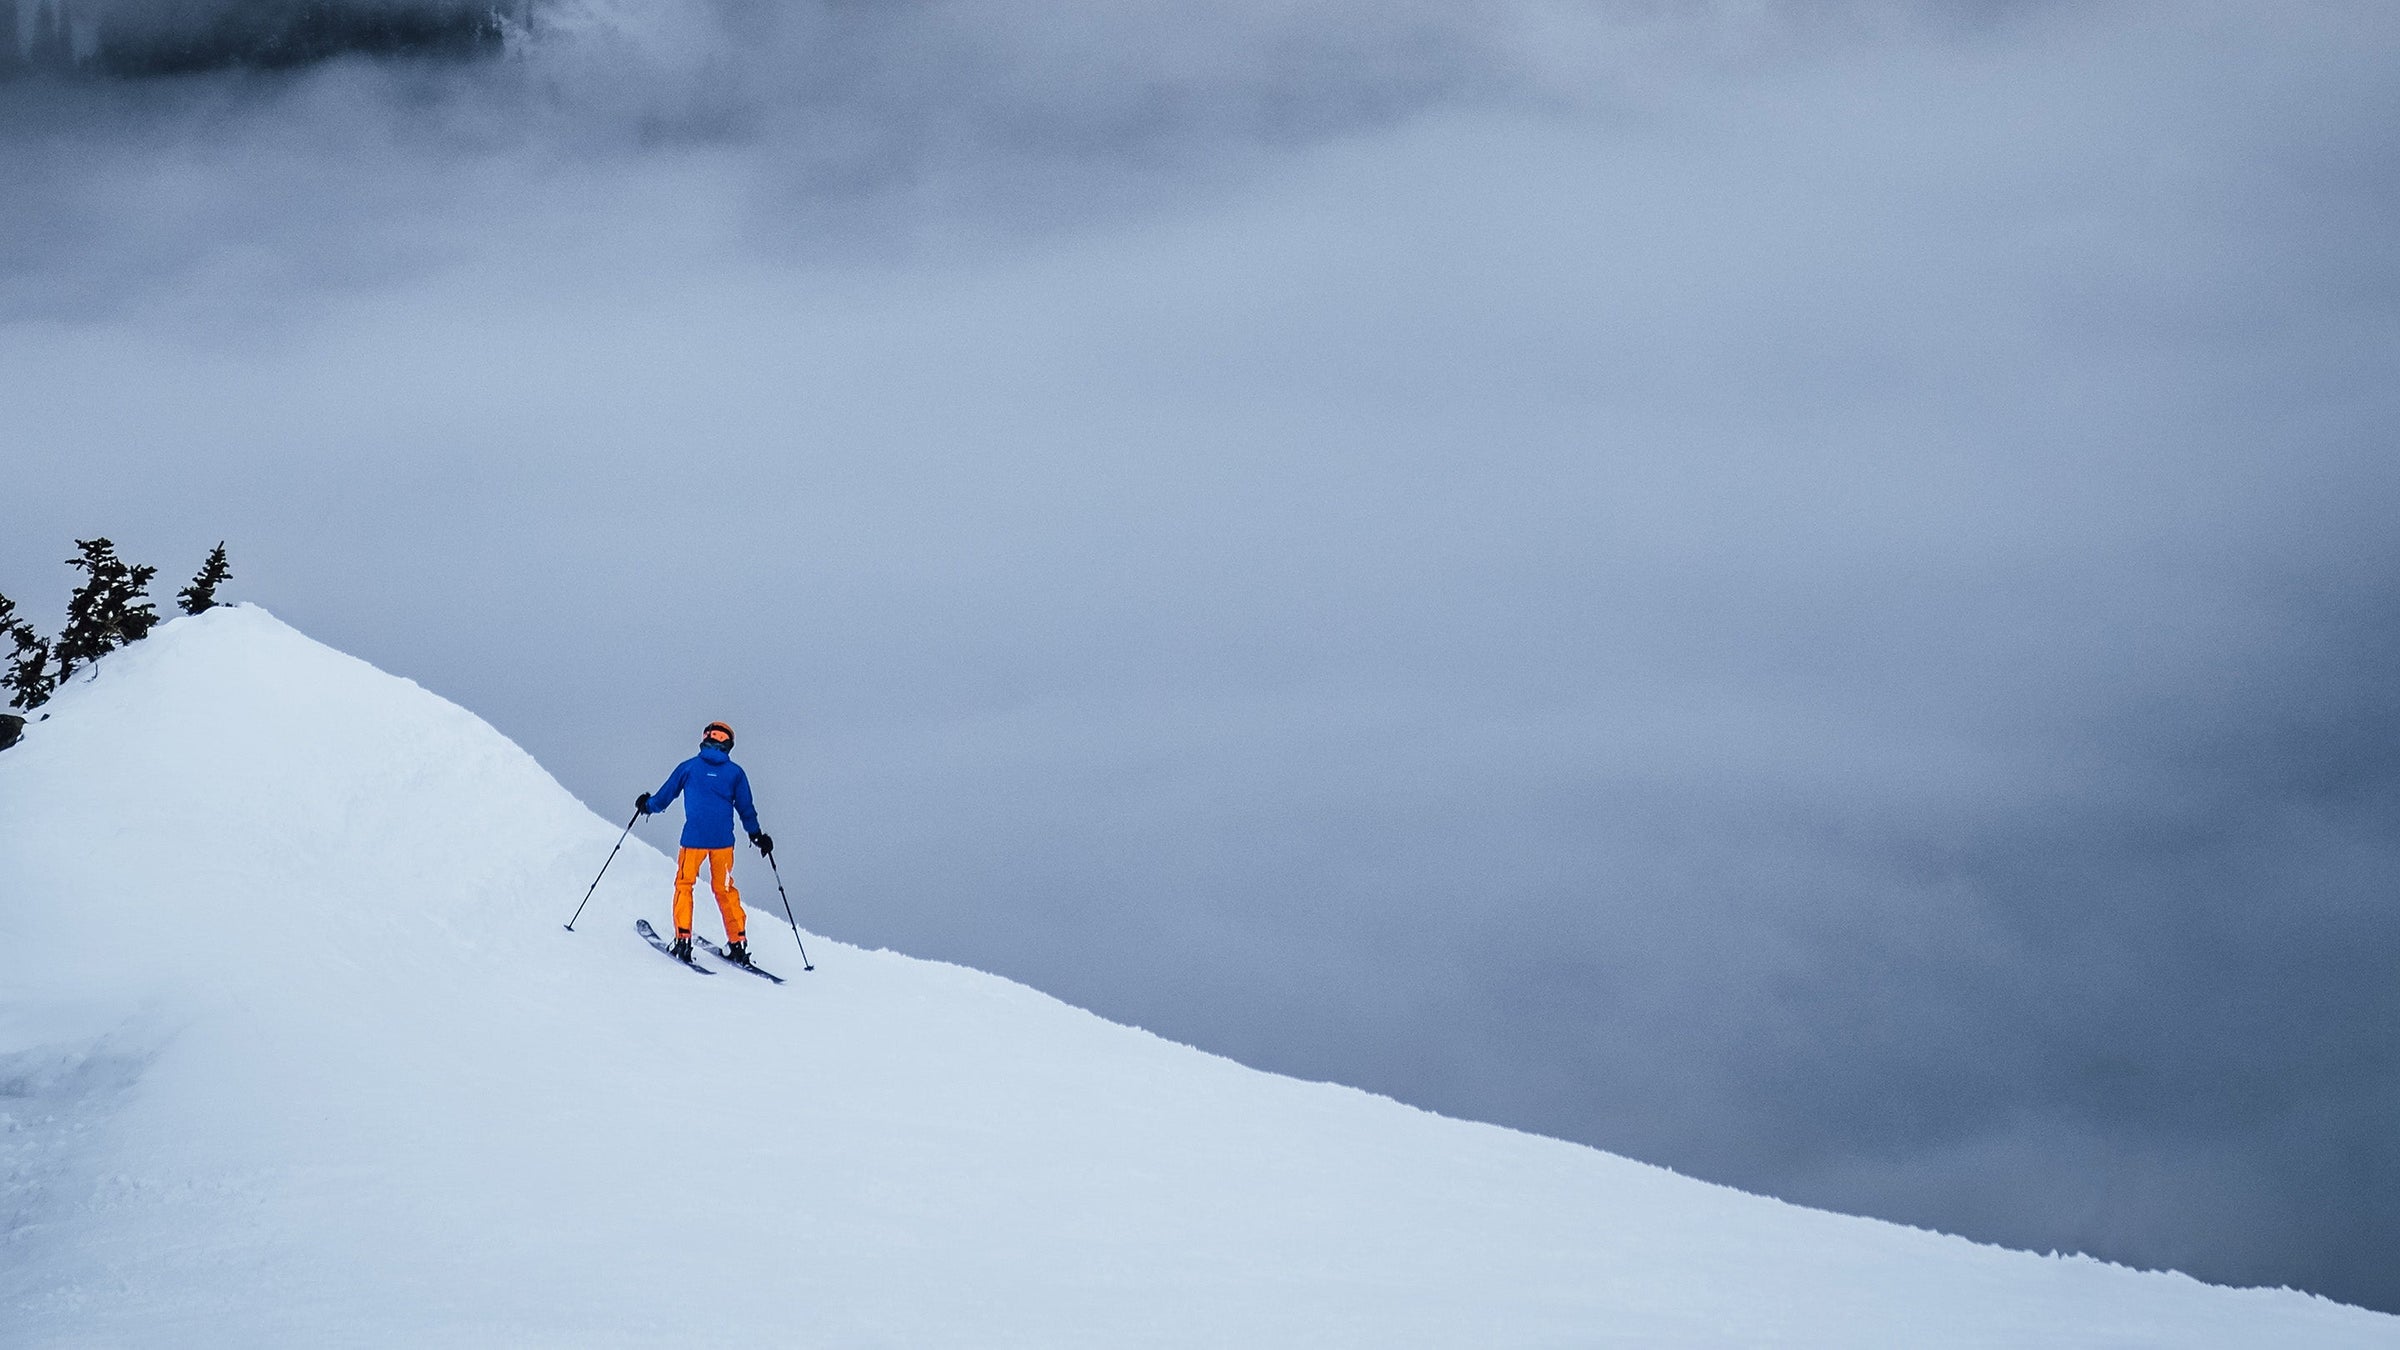 A skier descends a mountainside into the clouds